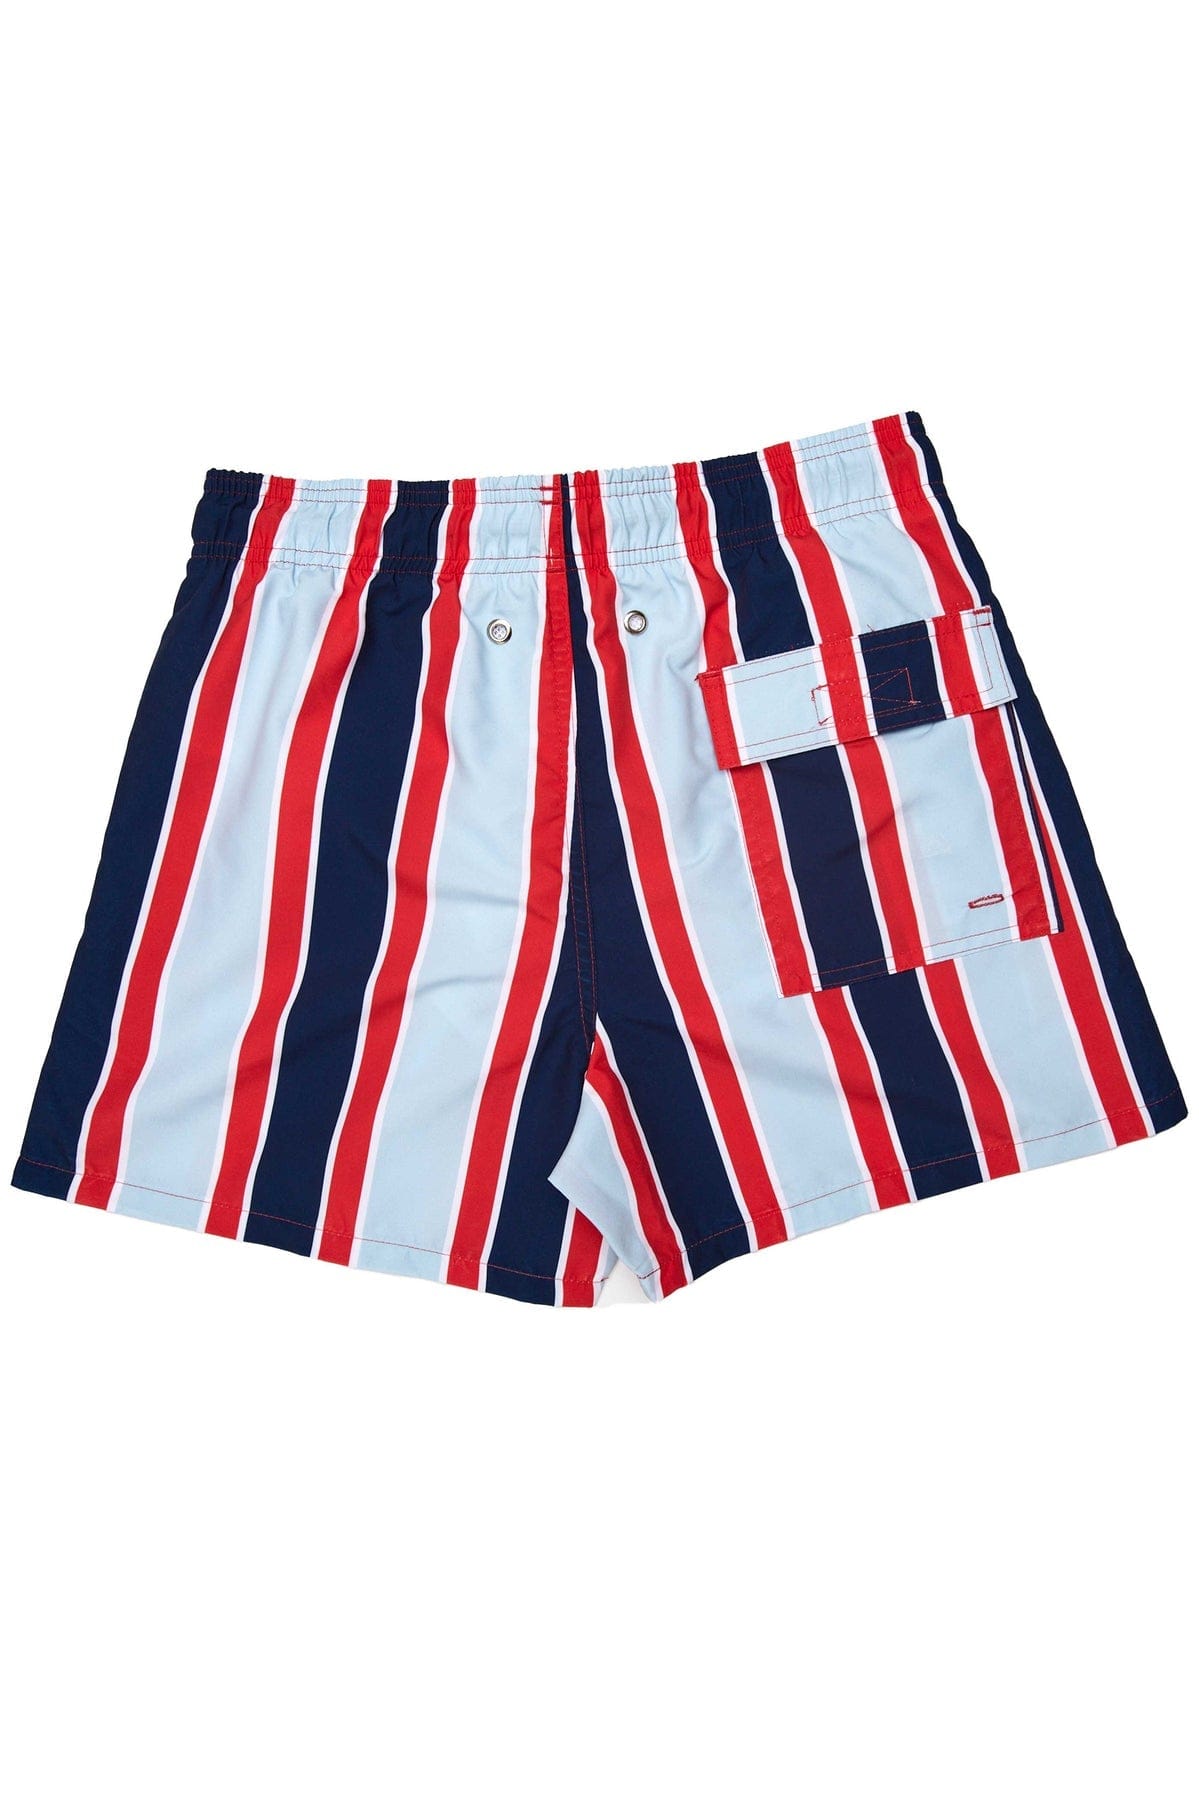 Le Club Apparel & Accessories > Clothing > Shorts Le Club Men's Swim Trunk Haya Red 2022 Le Club Men's Swim Trunk Haya Red